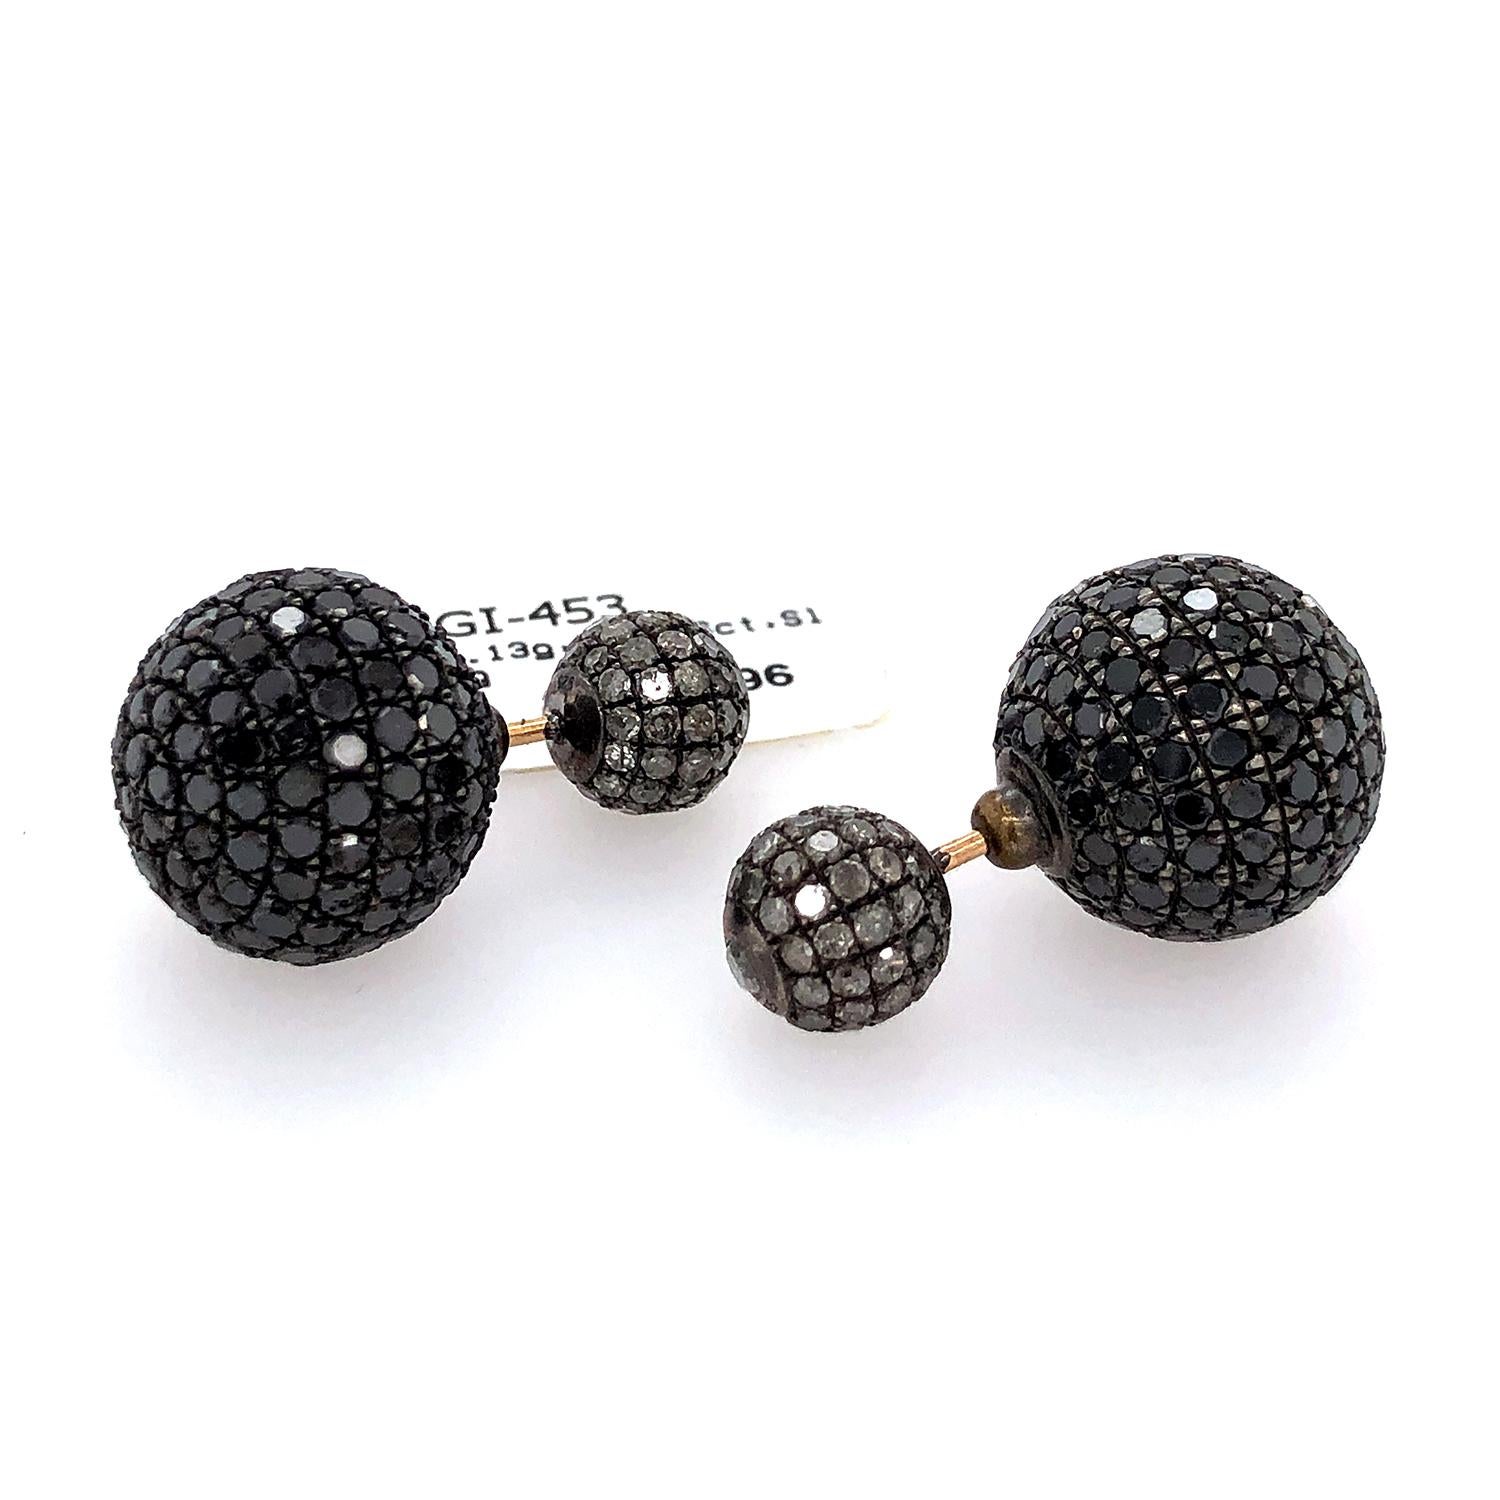 Artisan Pave Diamond Ball Tunnel Earrings Made in 18k Gold & Silver For Sale